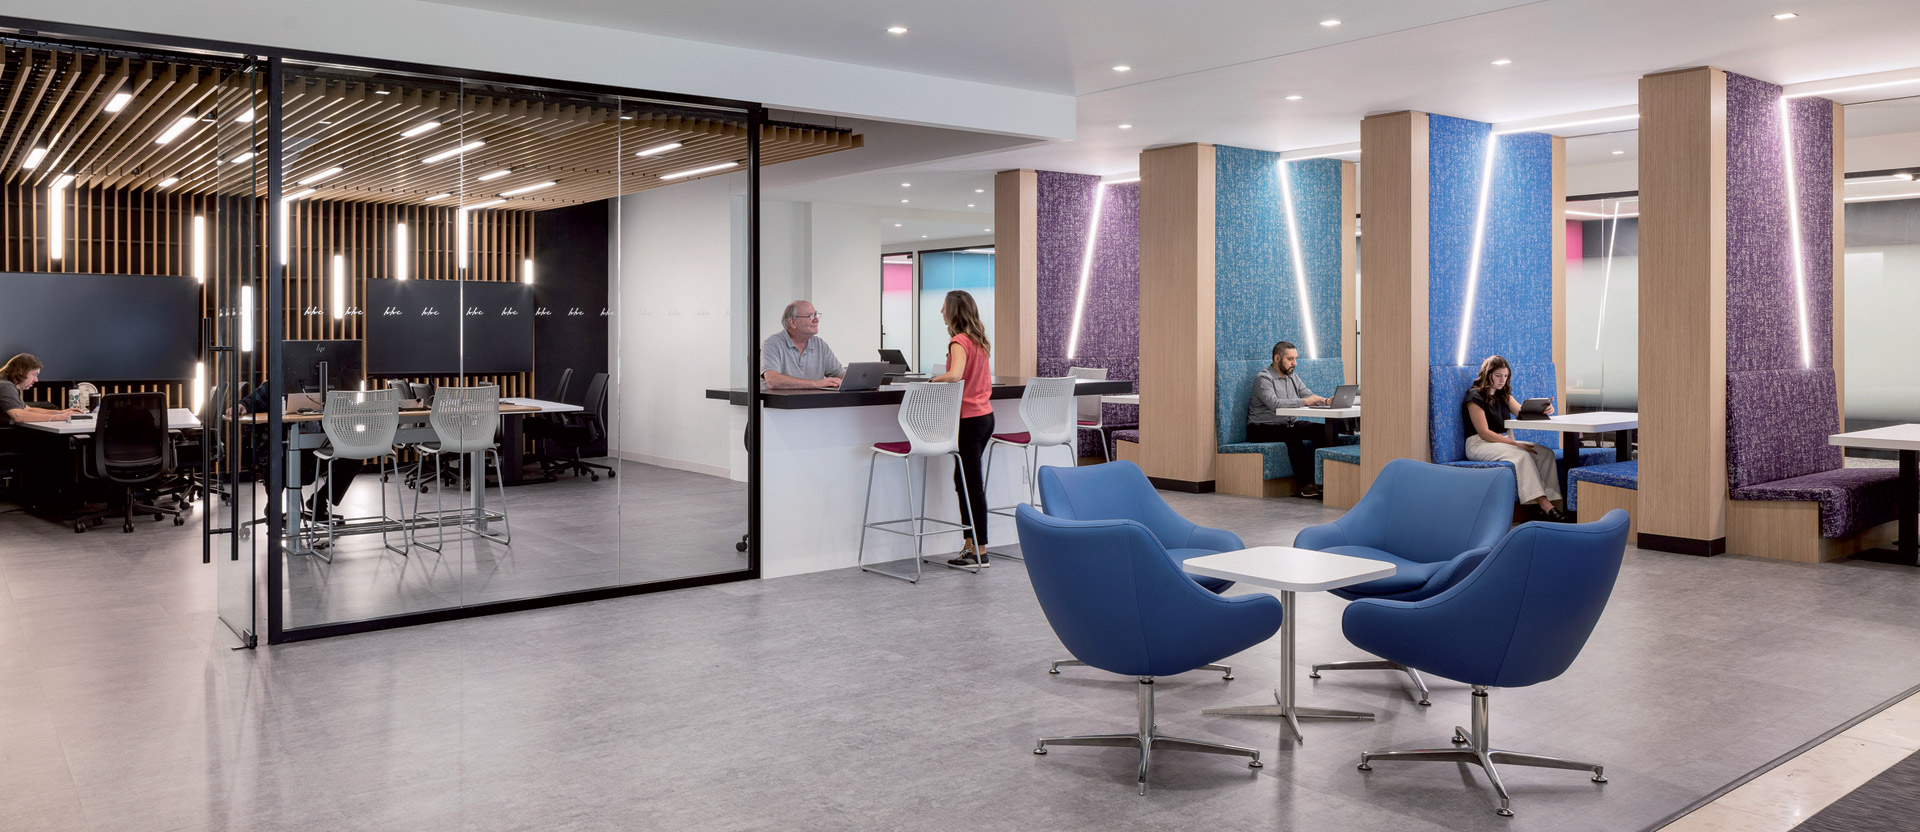 Contemporary office break room with vibrant blue egg chairs, sleek white high-top tables, and people in casual conversation. Textured columns with purple accents complement the neutral-toned flooring and wooden slatted ceiling design.